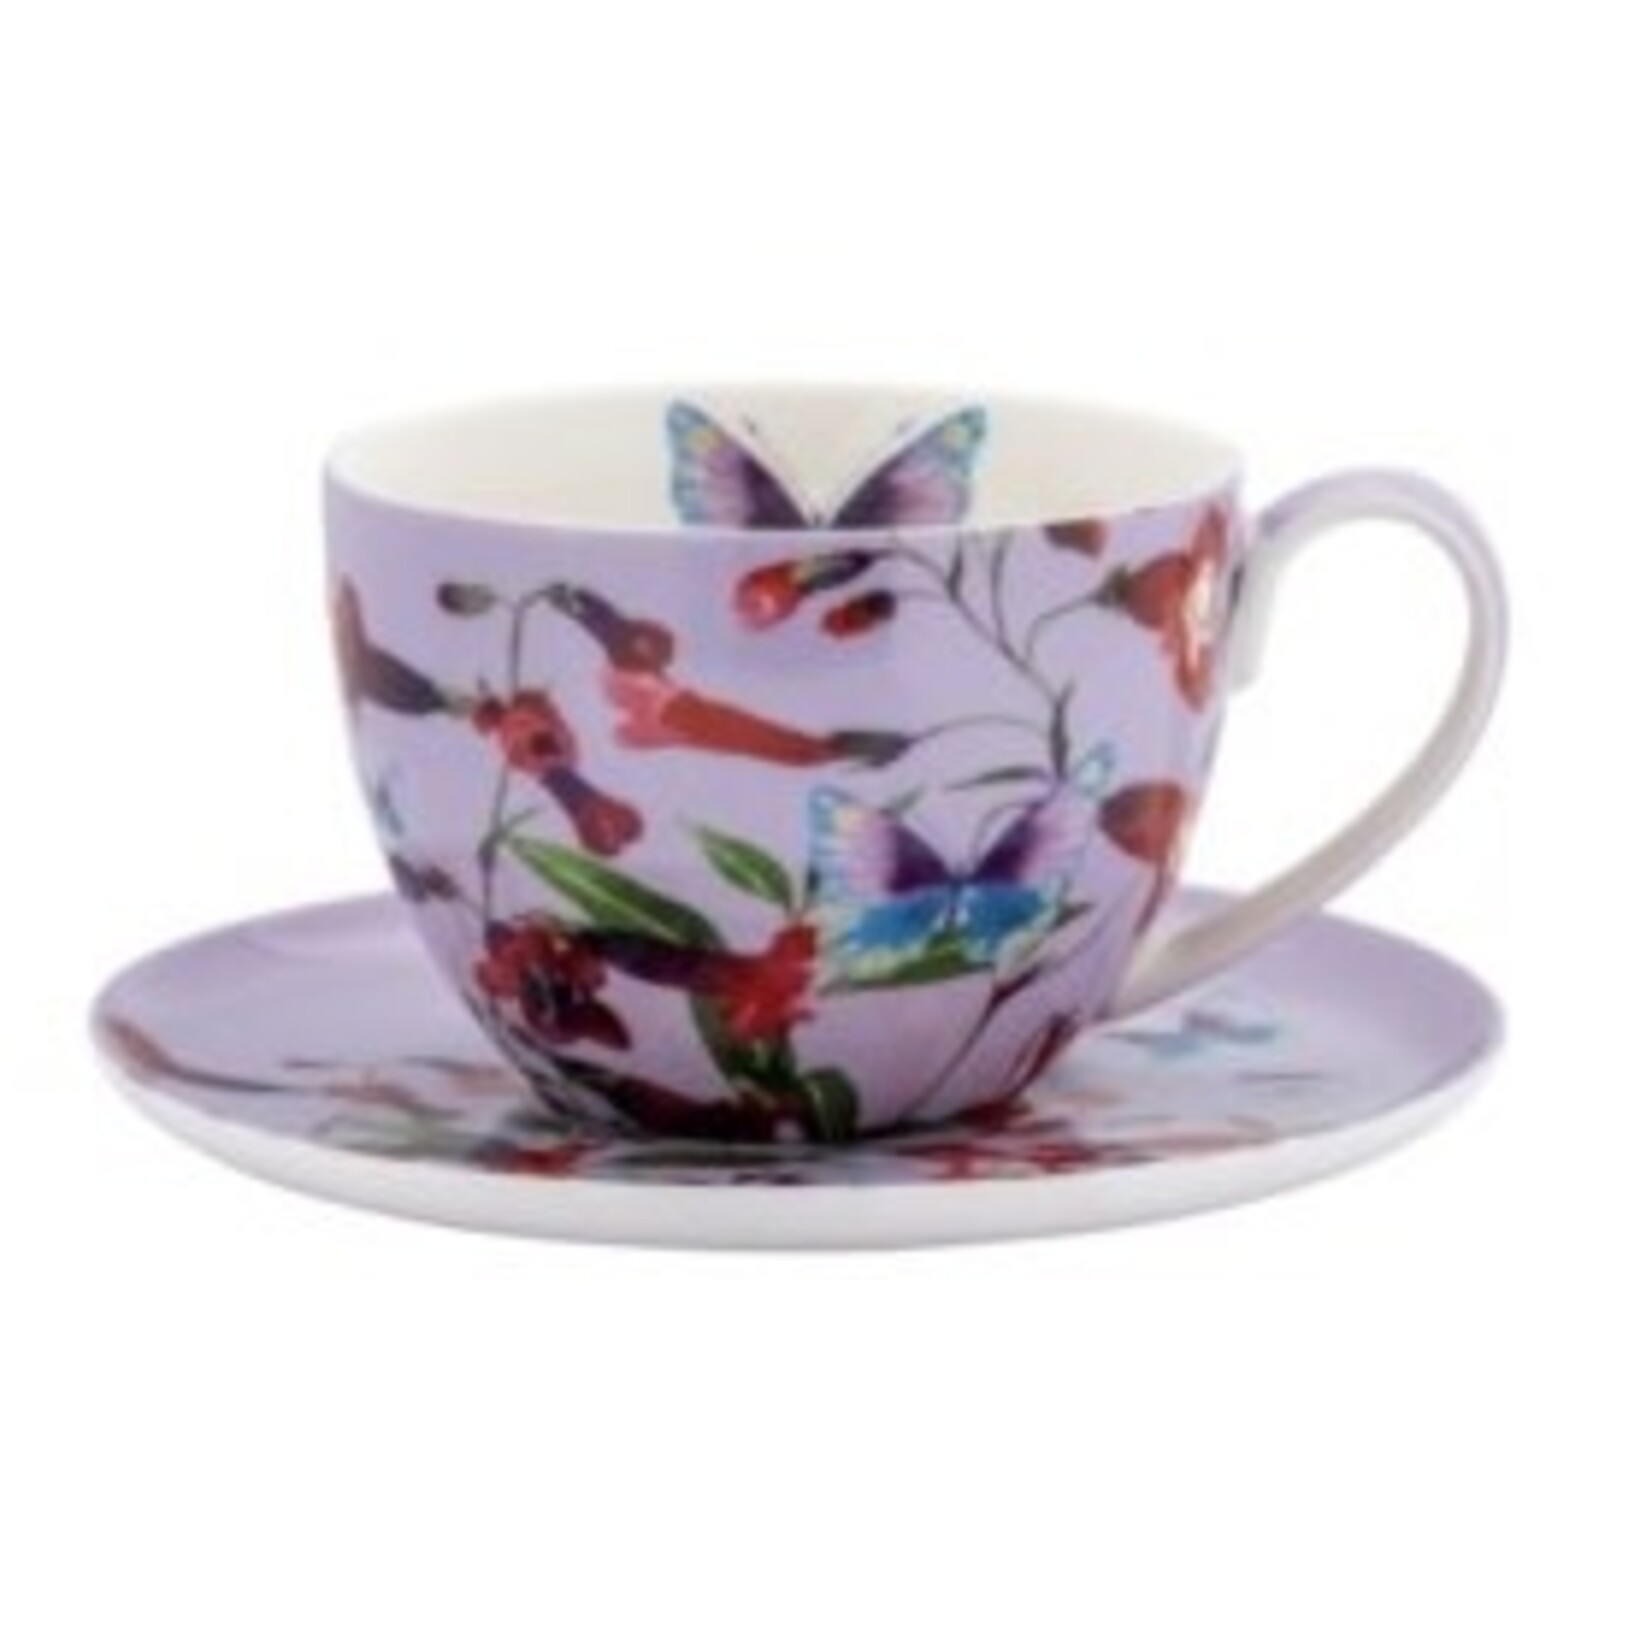 MAXWELL WILLIAMS MAXWELL WILLIAMS Cup & Saucer - Posey Penstemons